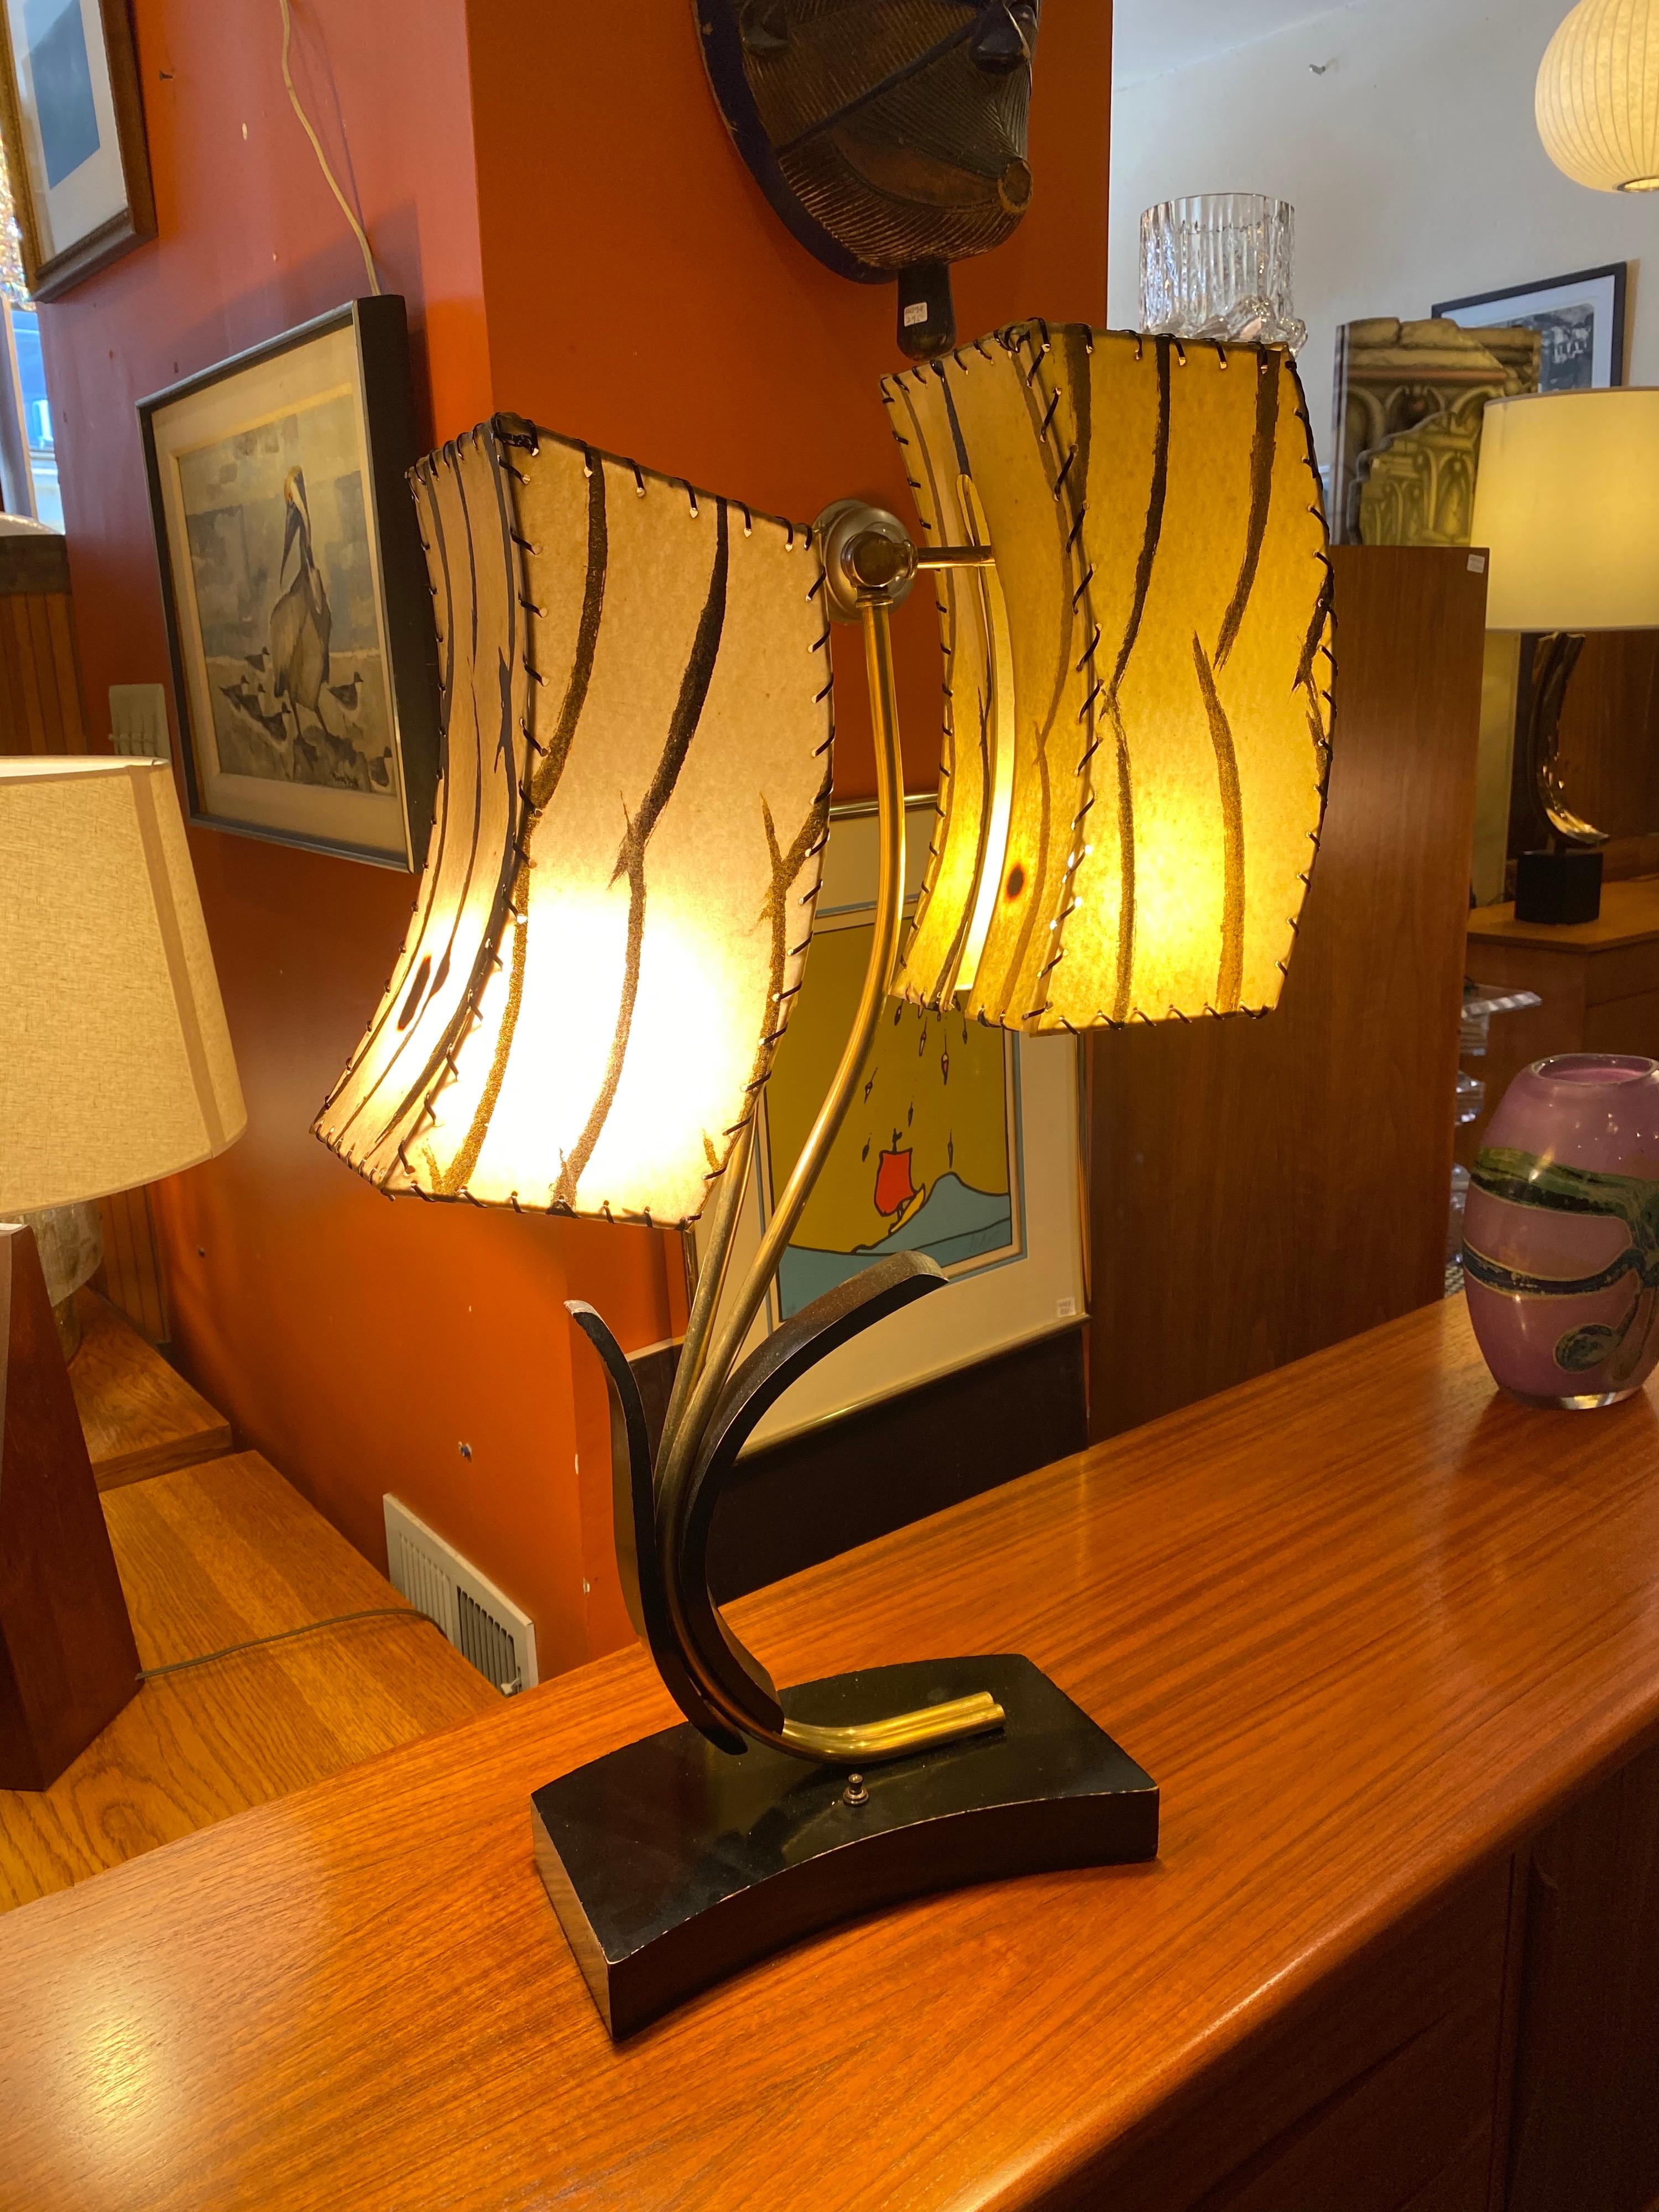 Majestic 2-shade table lamp. Fiberglass shades have all been re-gimped and lamp has been rewired. Classic midcentury look and feel! Fiberglass shades each have one burn spot as seen in photos. Switch turns one or two shades on!